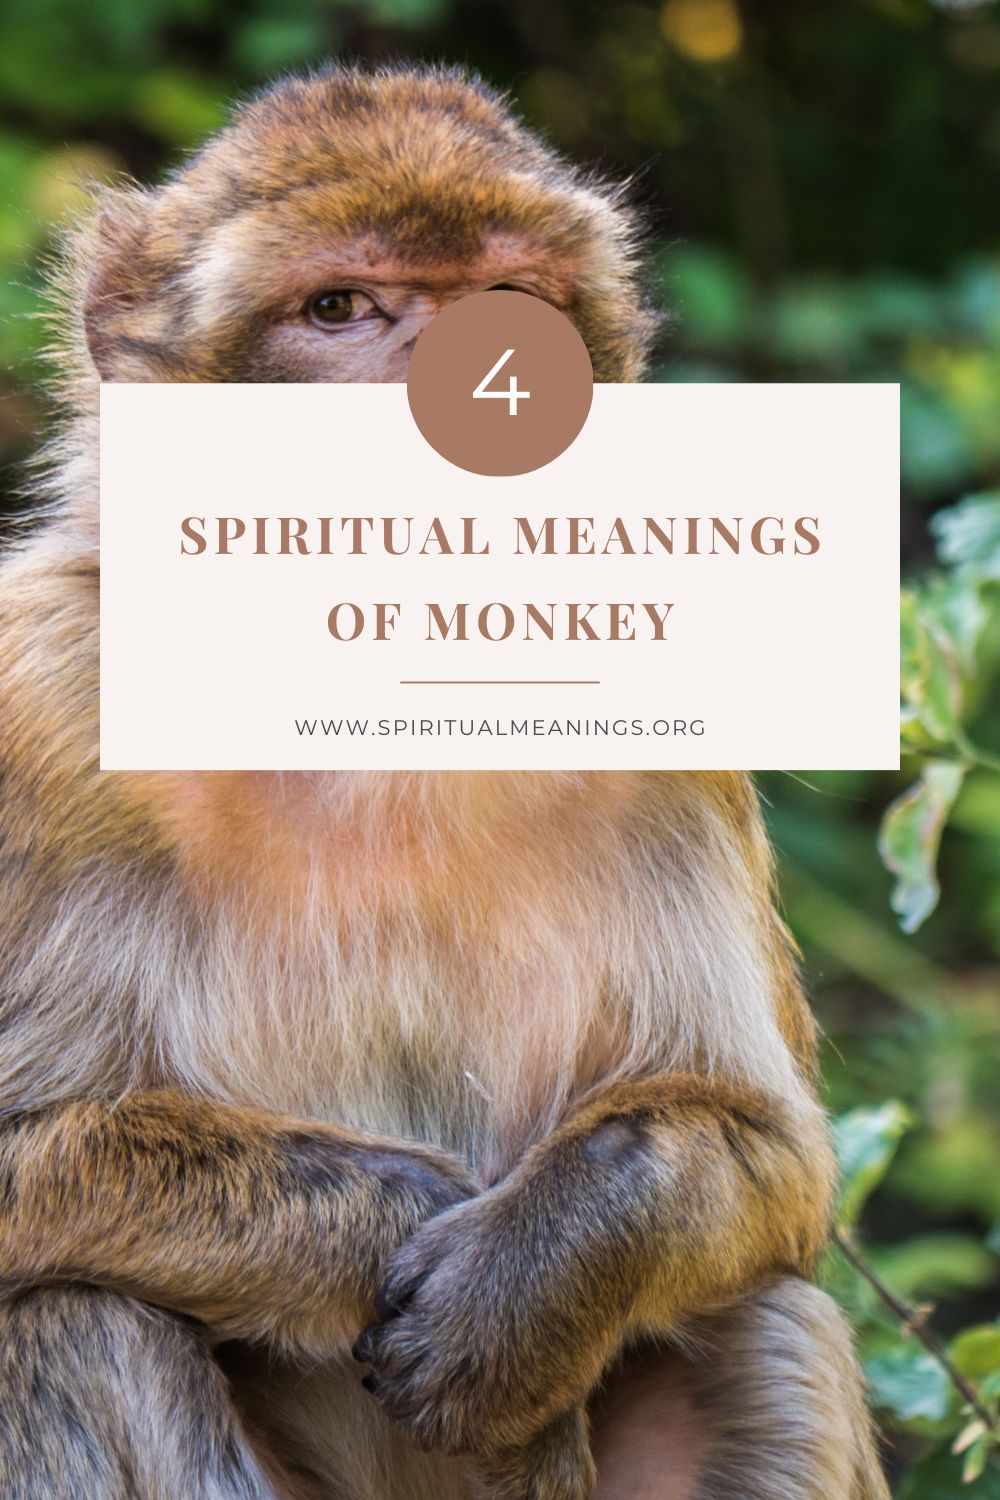 Monkey Spirit Animal - Symbolism and Meaning – Planet Charms